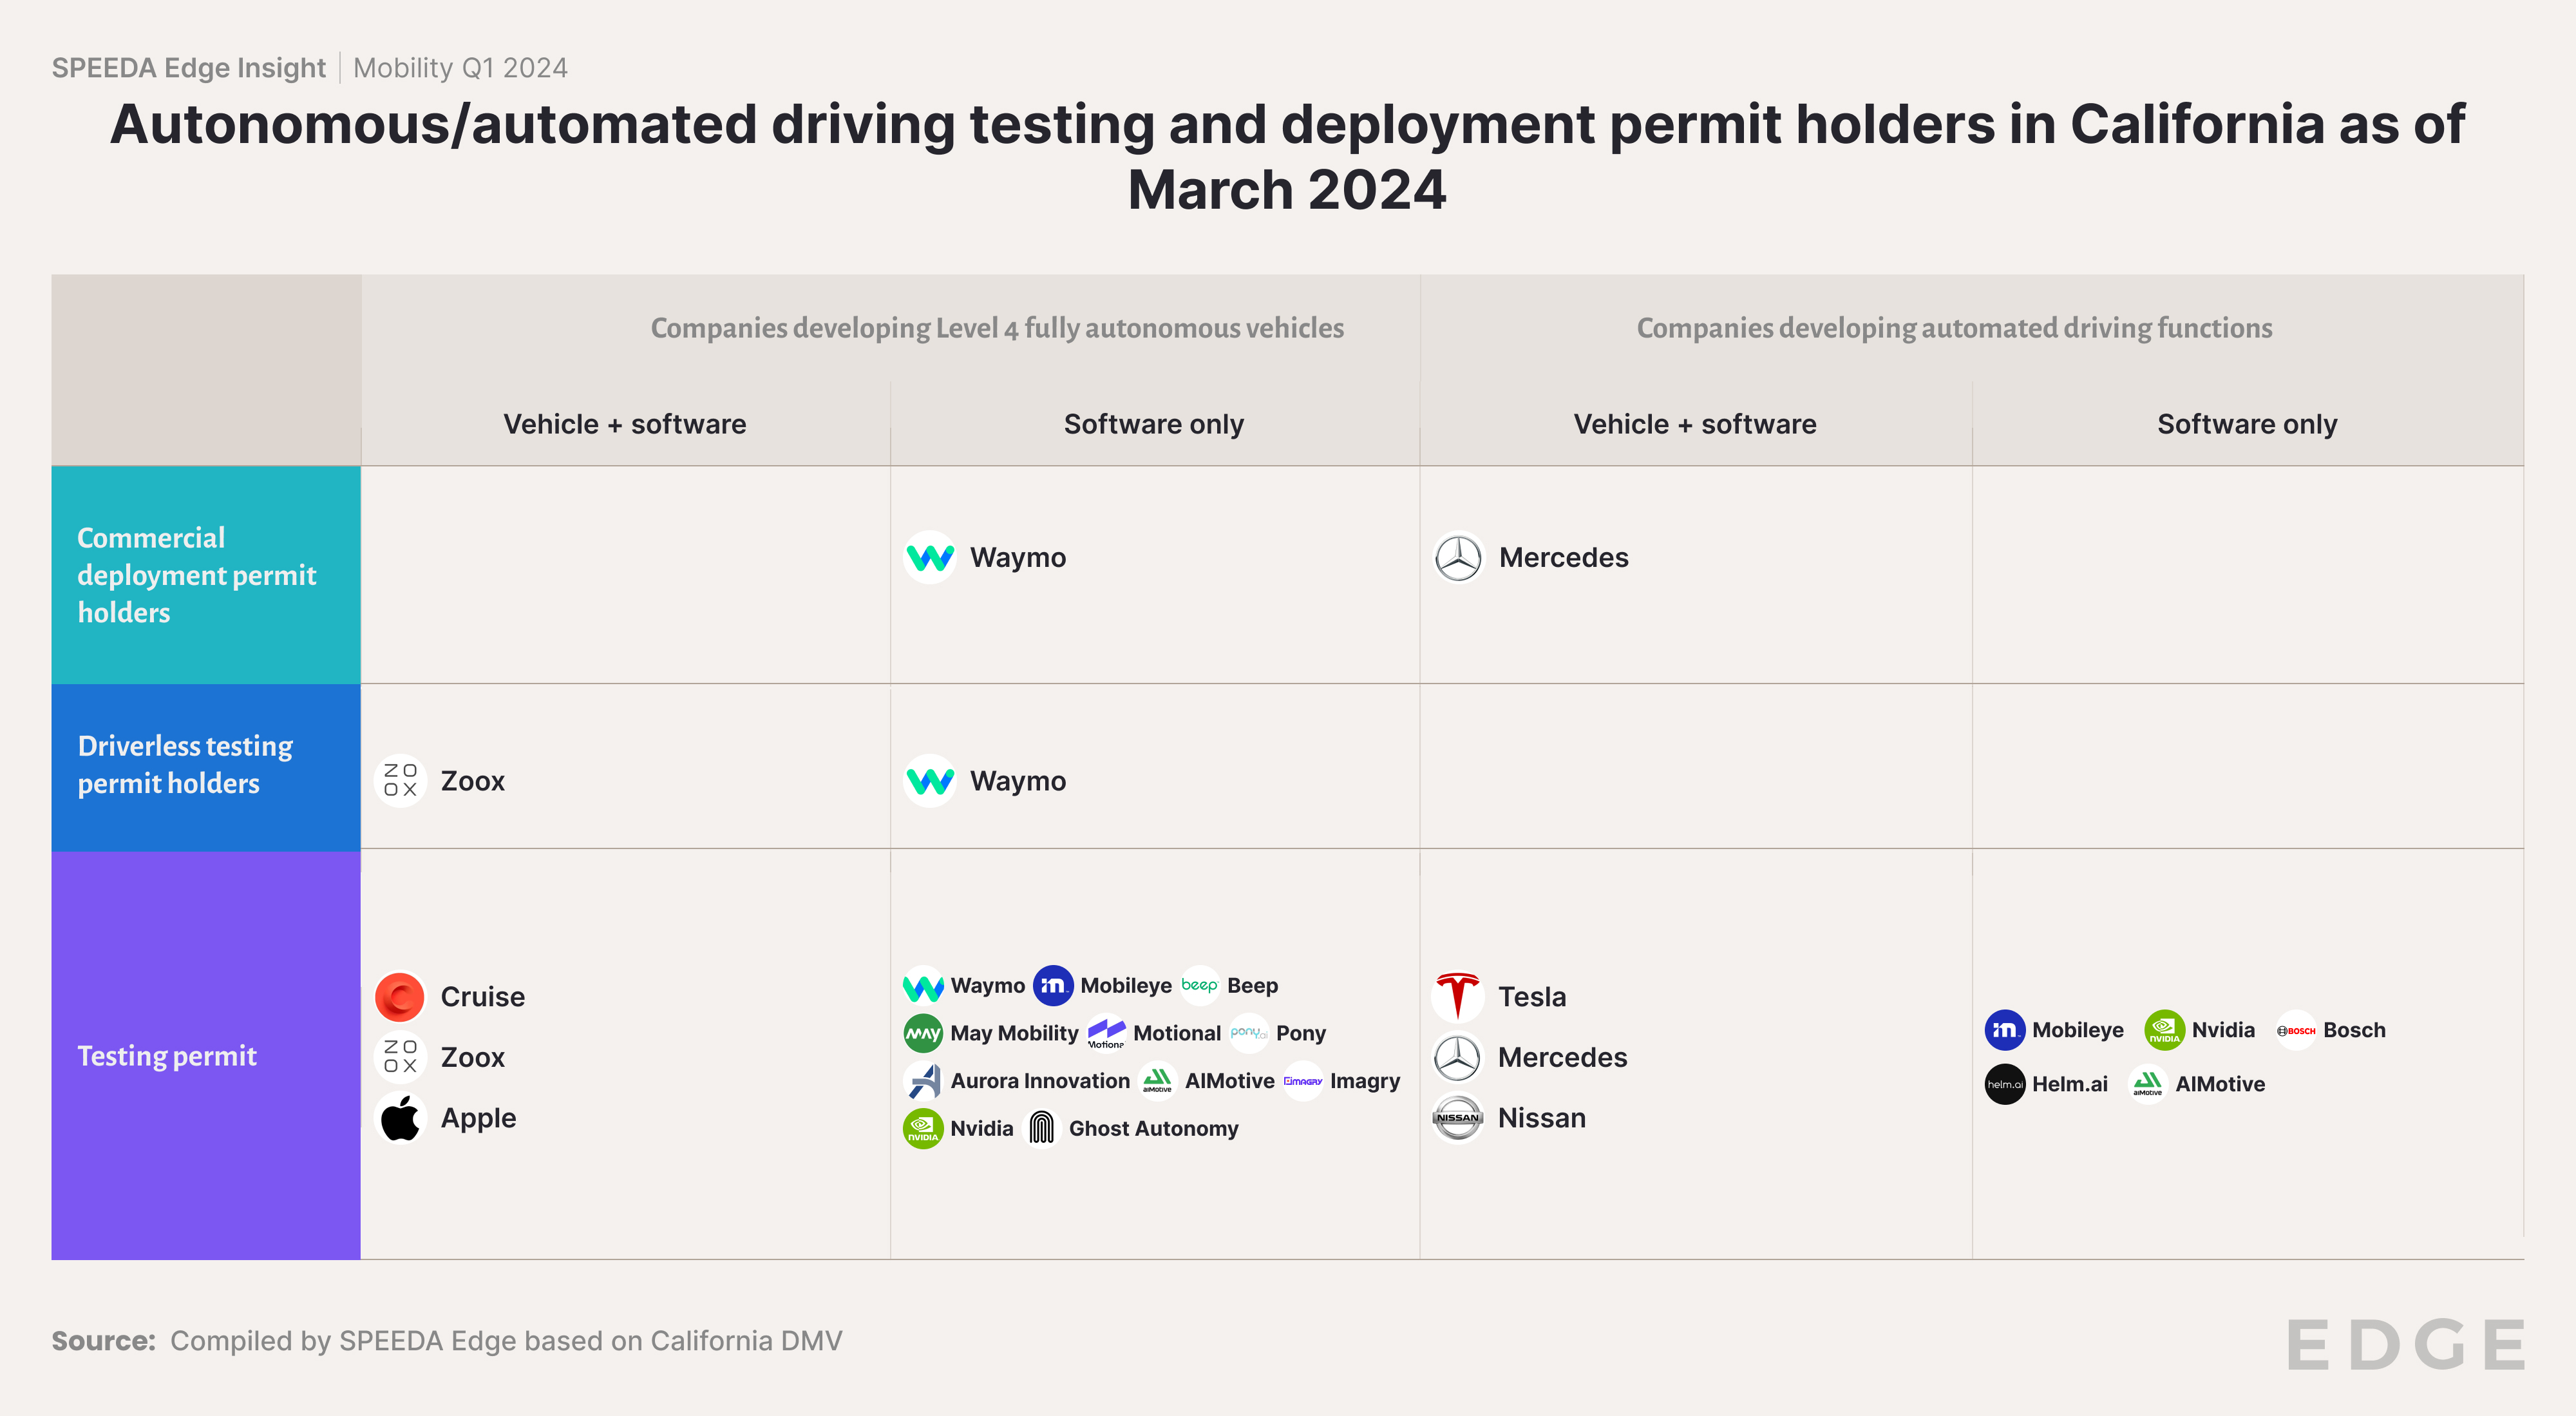 Mobility1Q2024_Autonomous/automated driving testing and deployment permit holders in California as of March 2024